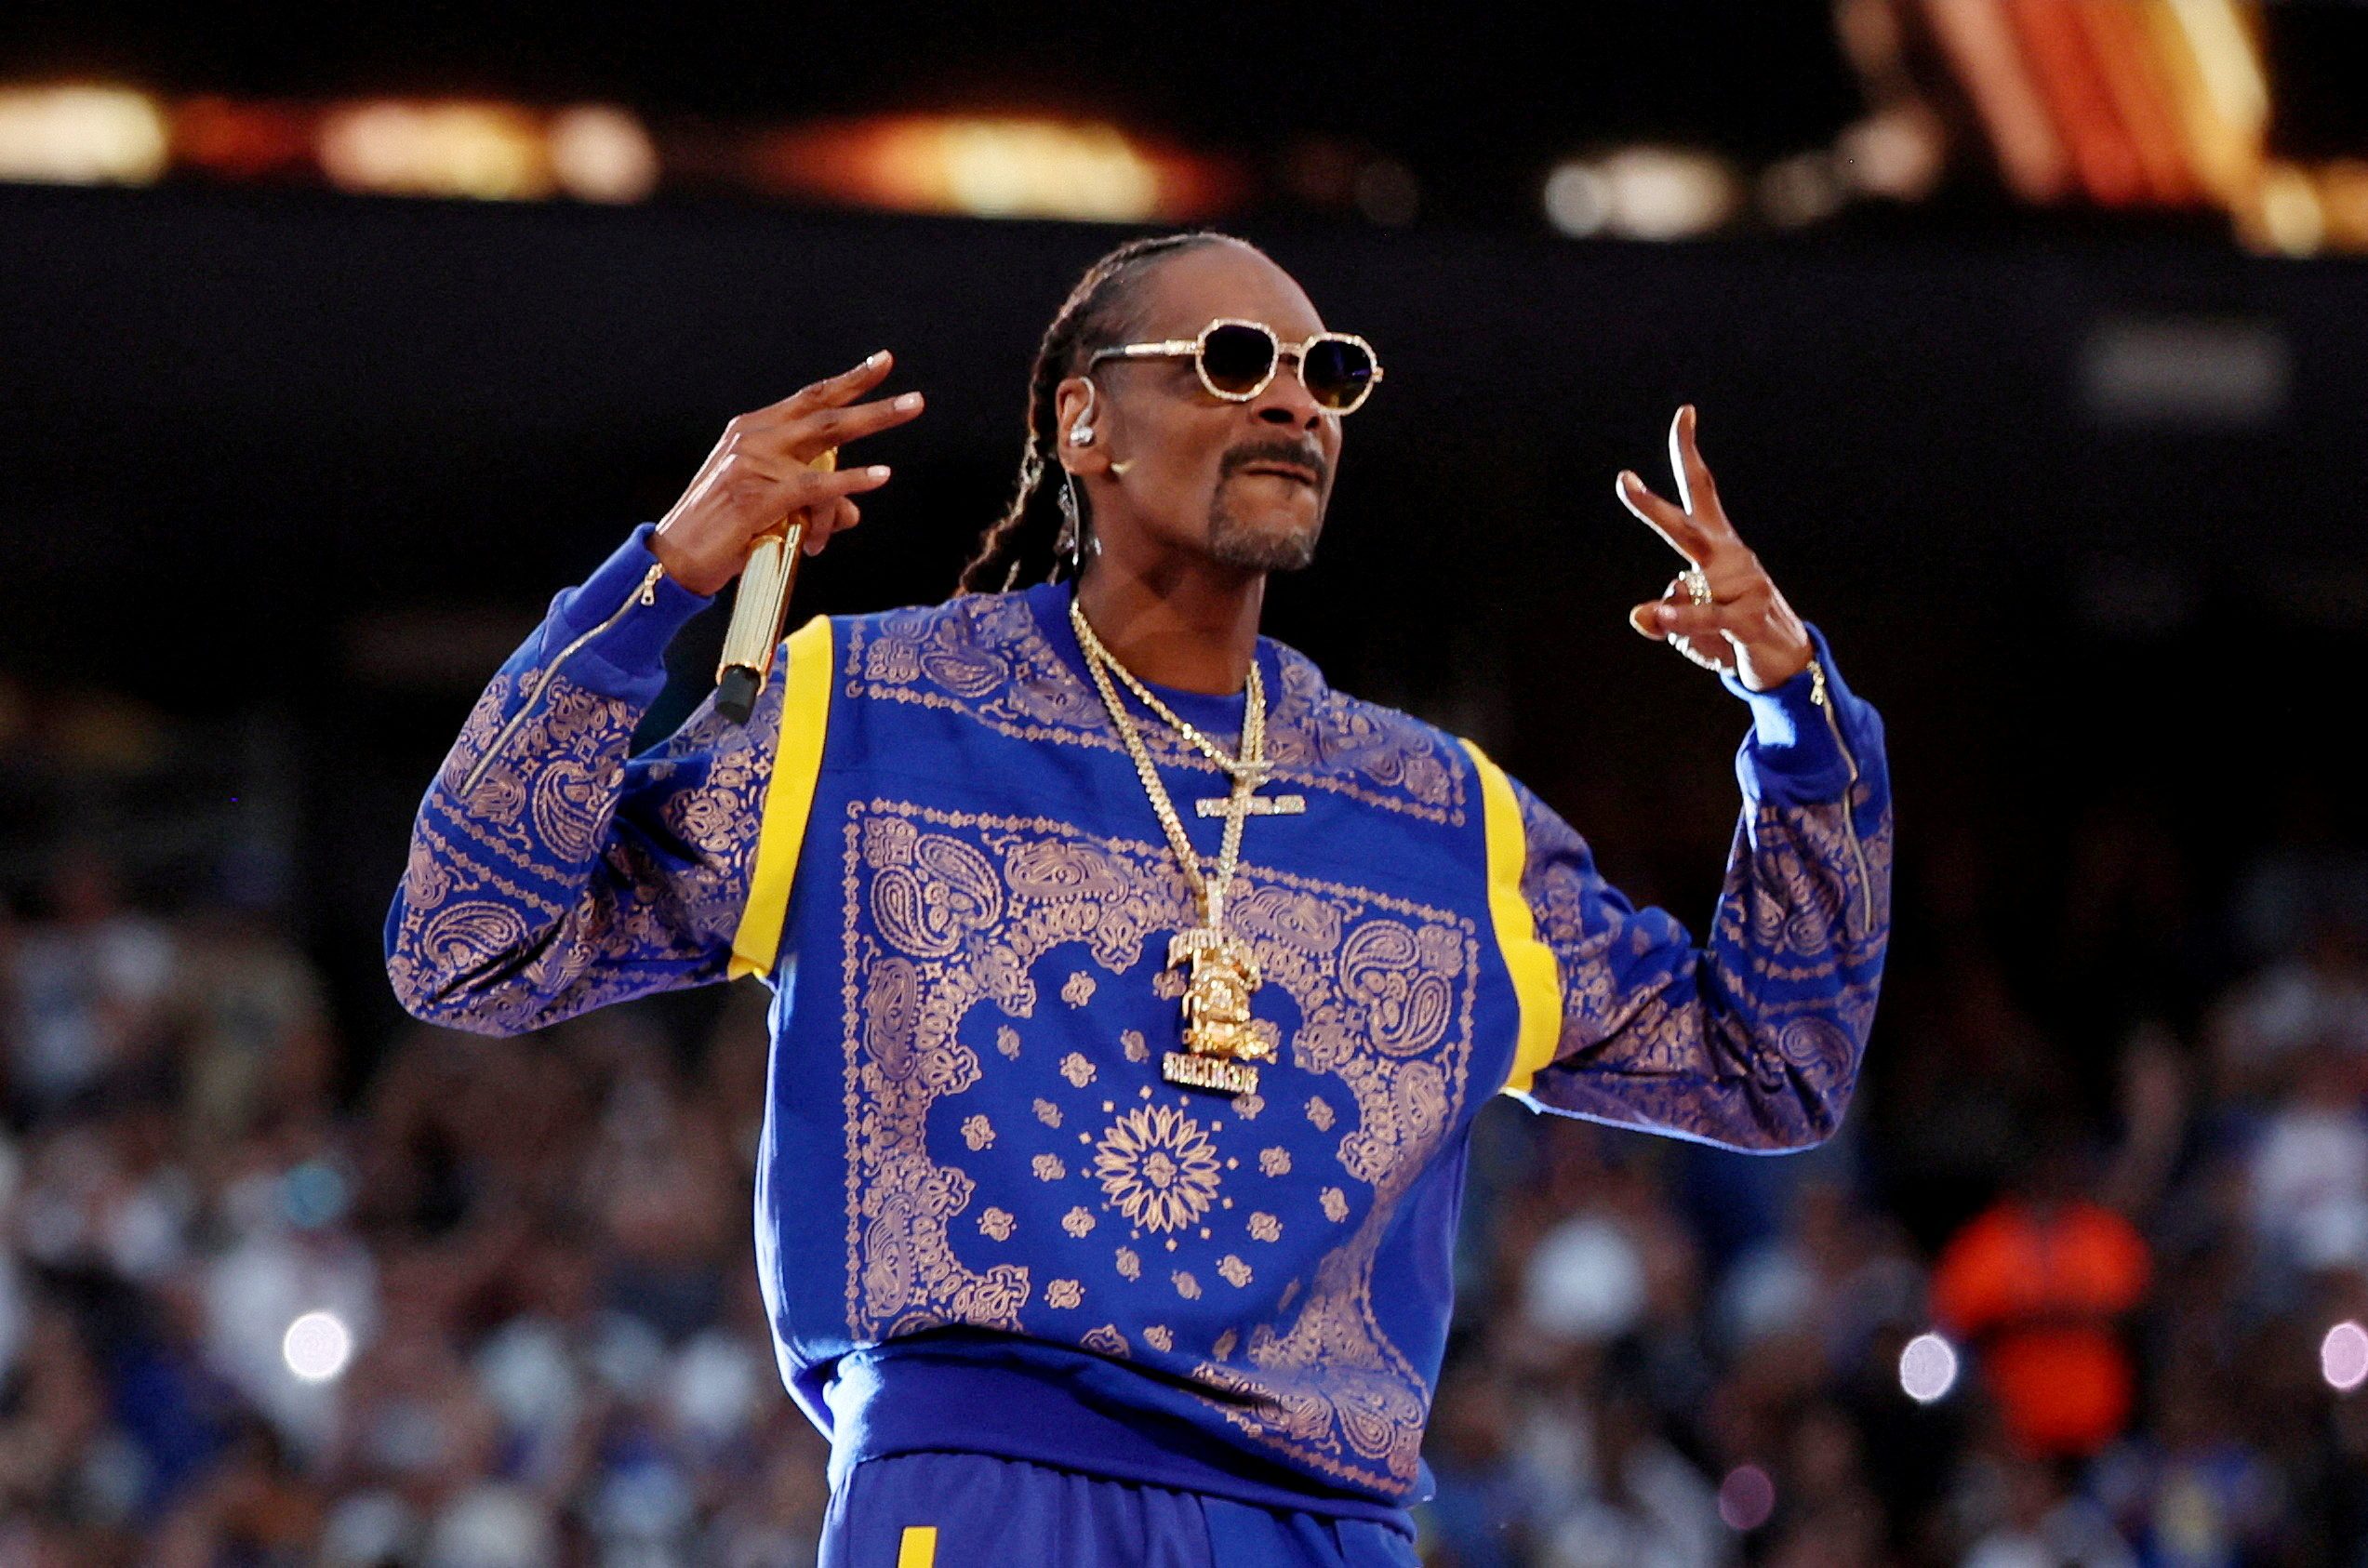 Woman who accused Snoop Dogg of sexual assault withdraws lawsuit